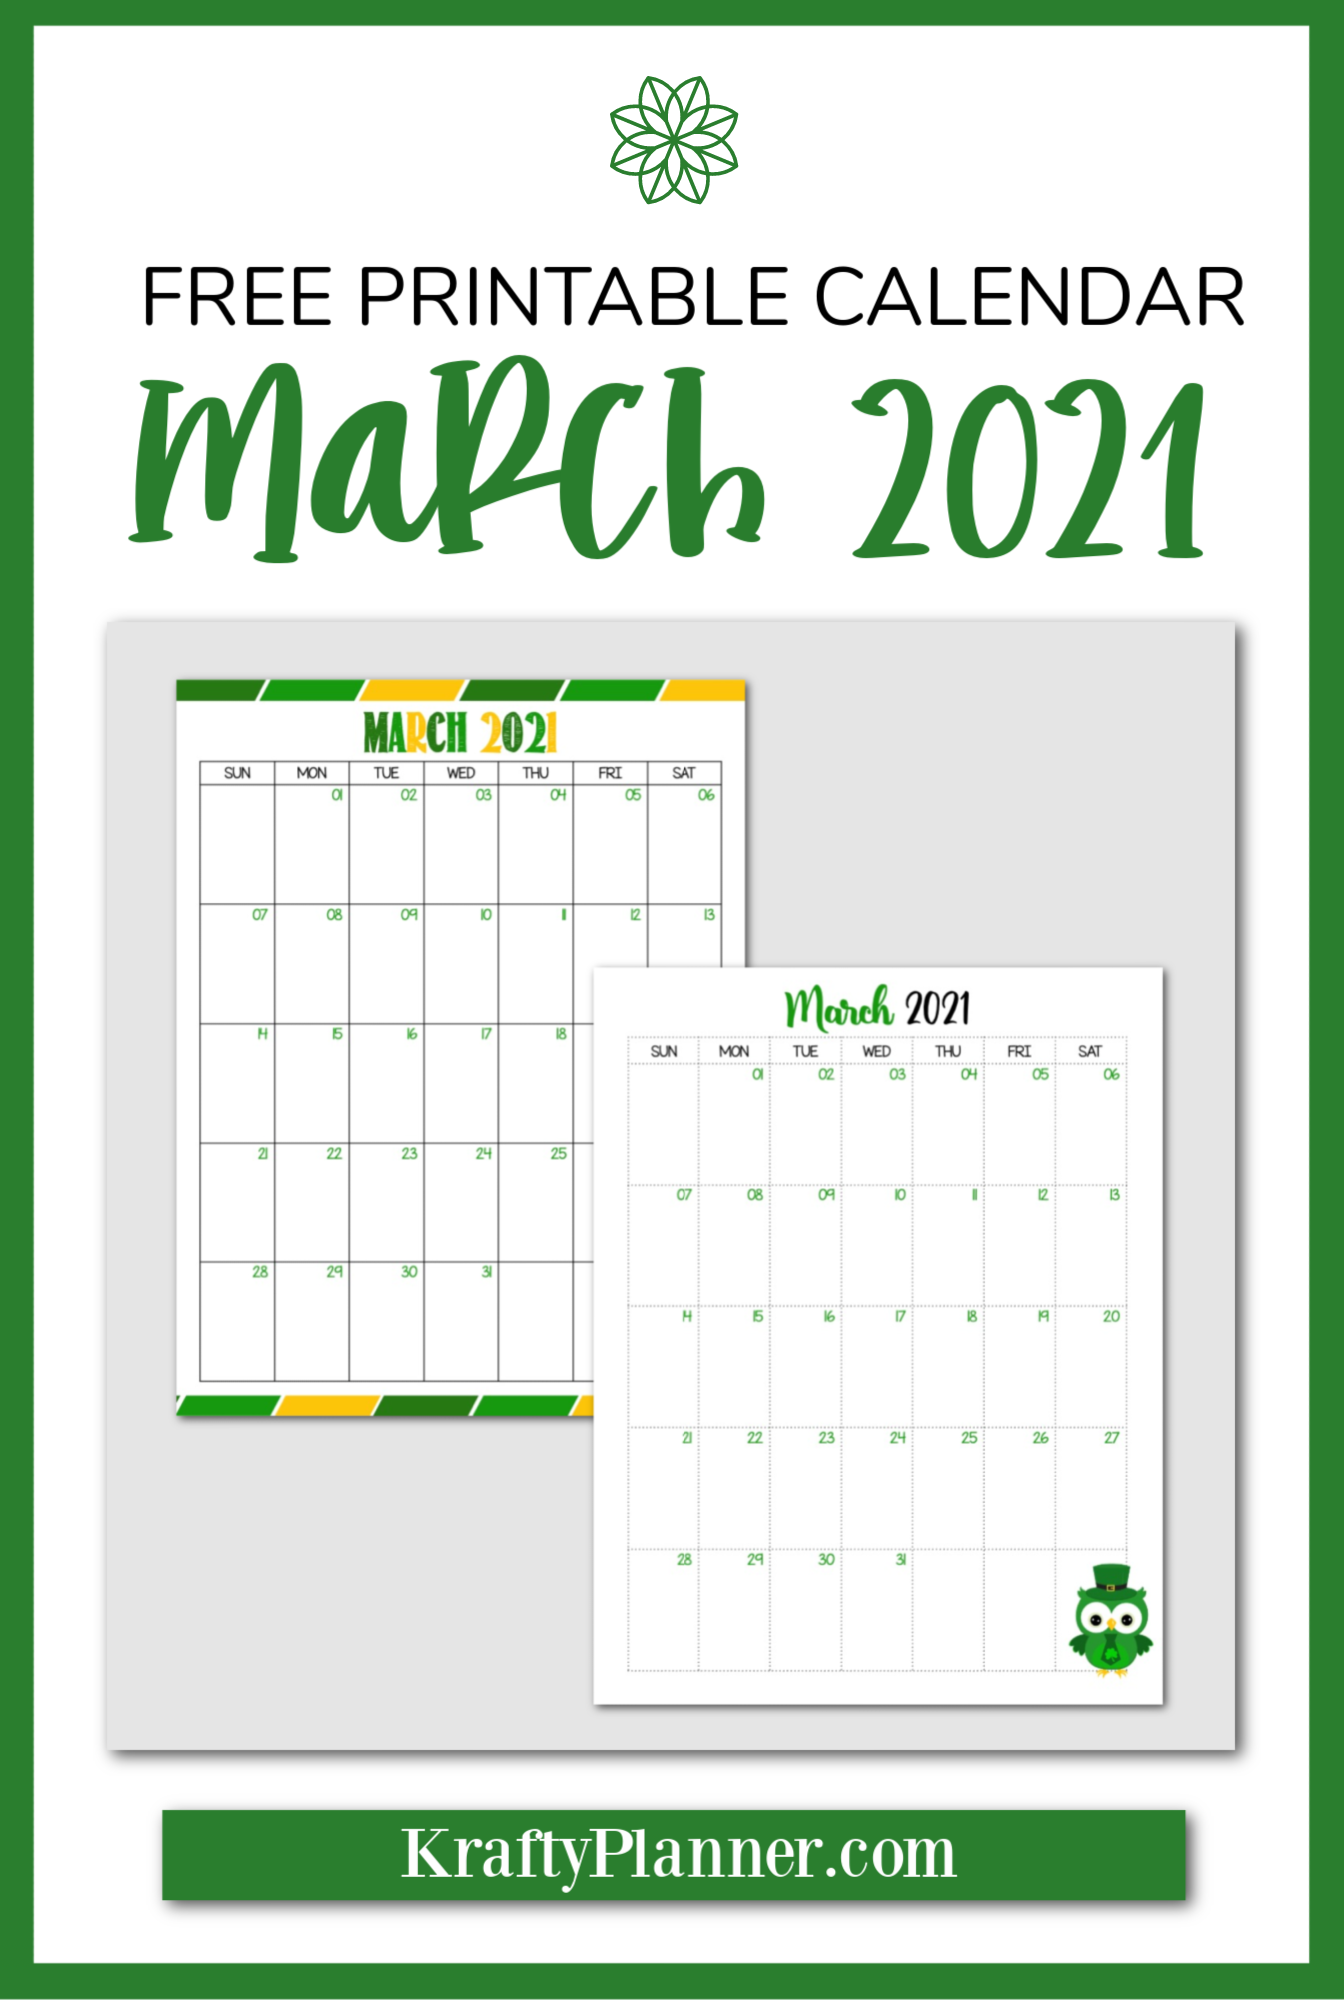 Free Printable March 2021 Calendar PIN 2.png